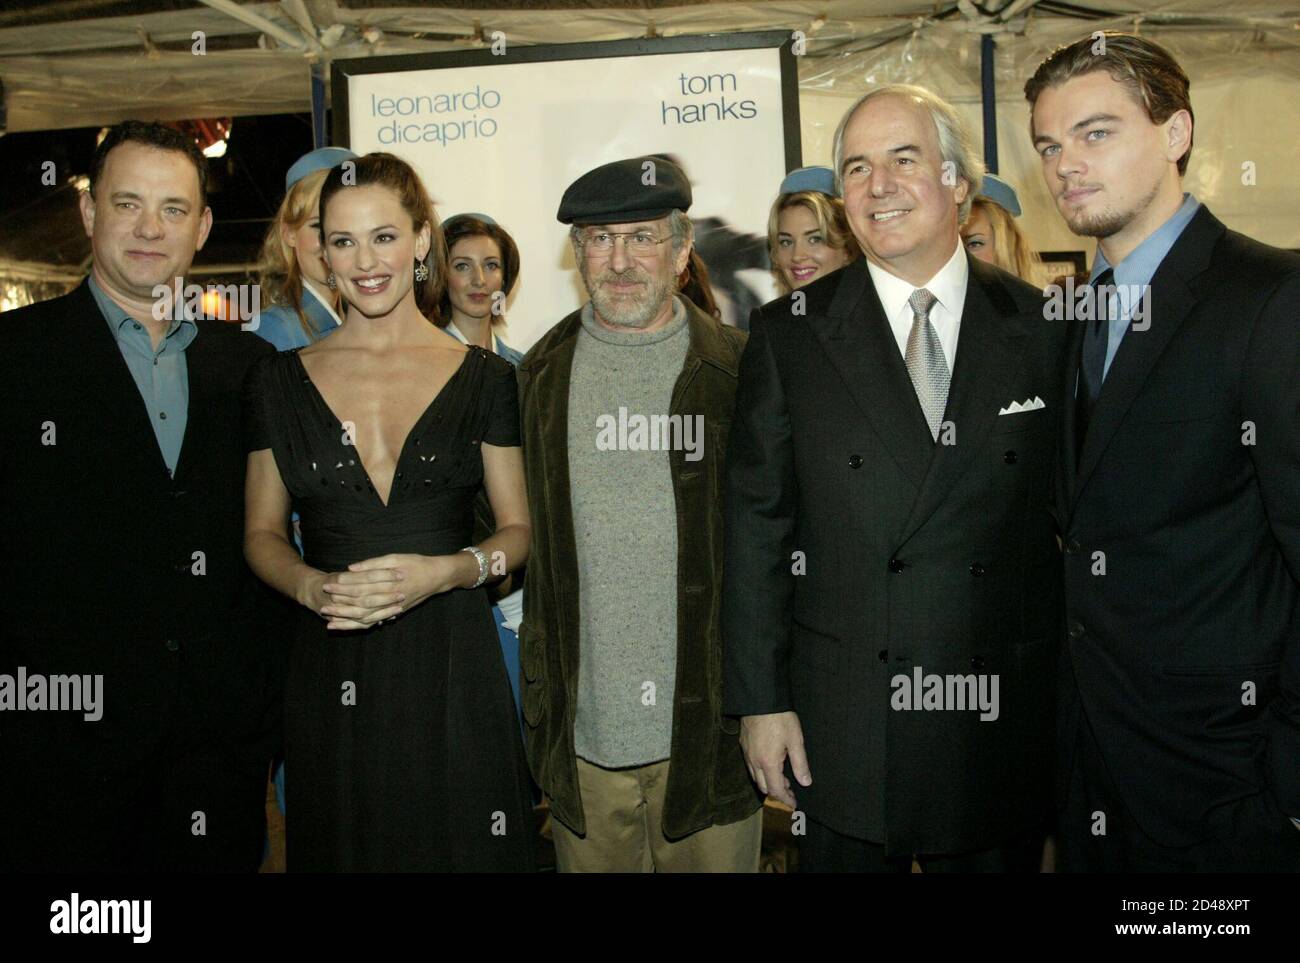 Actors Tom Hanks (L) and Leonardo DiCaprio (R) join others from the film "Catch  Me If You Can" at a special screening December 16, 2002 in Los Angeles.  From left are Hanks,